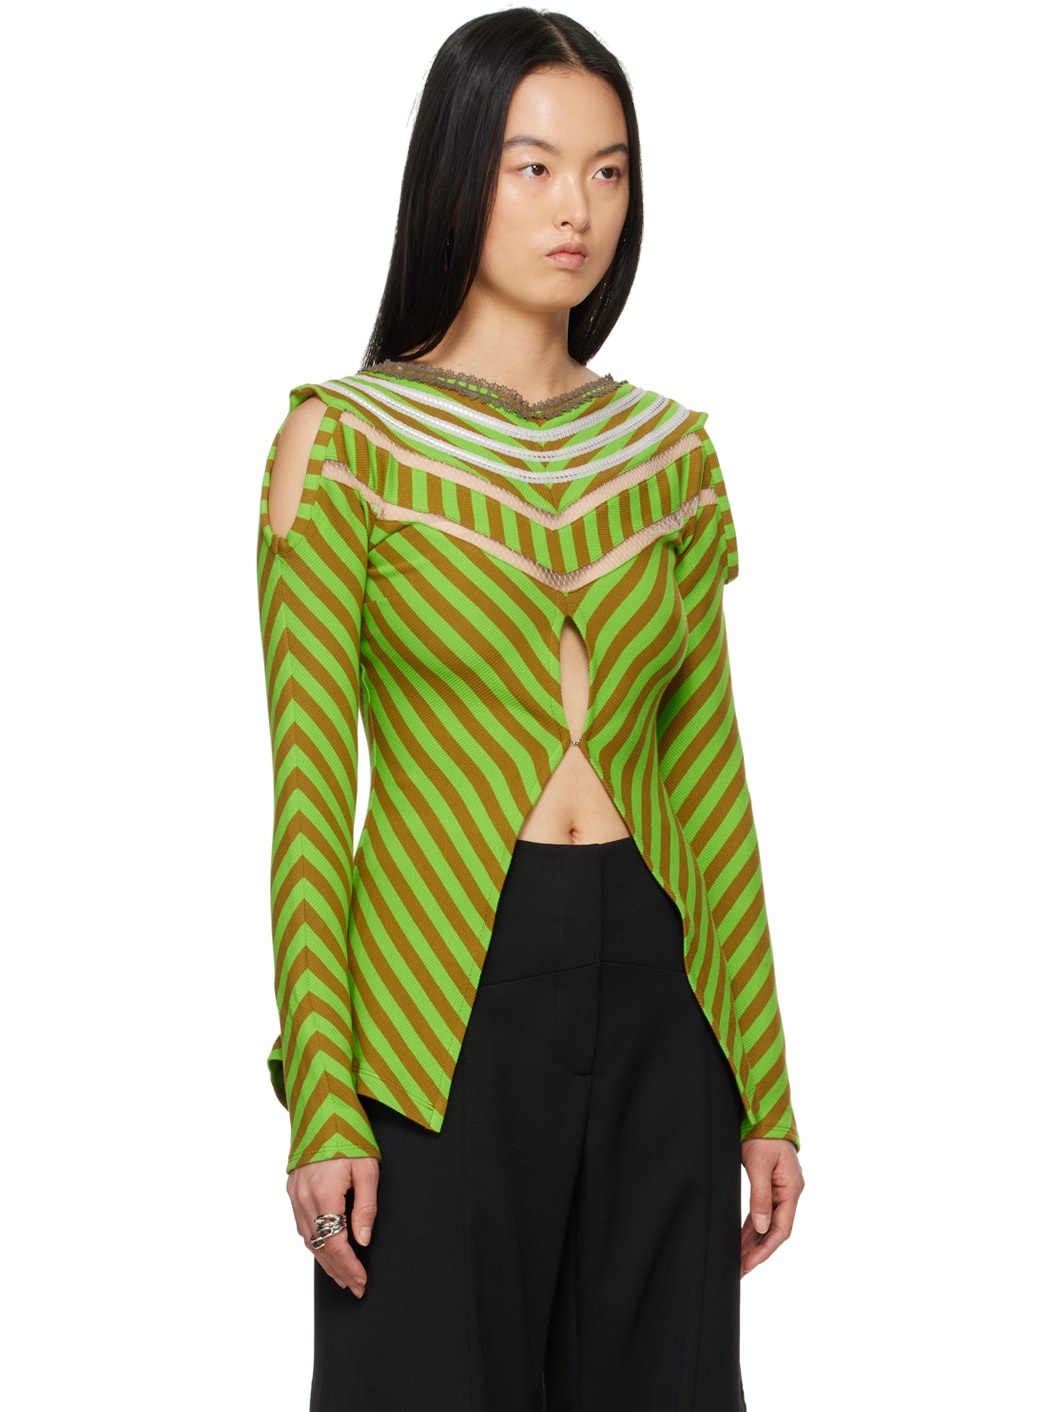 Green Panoply Top - 2